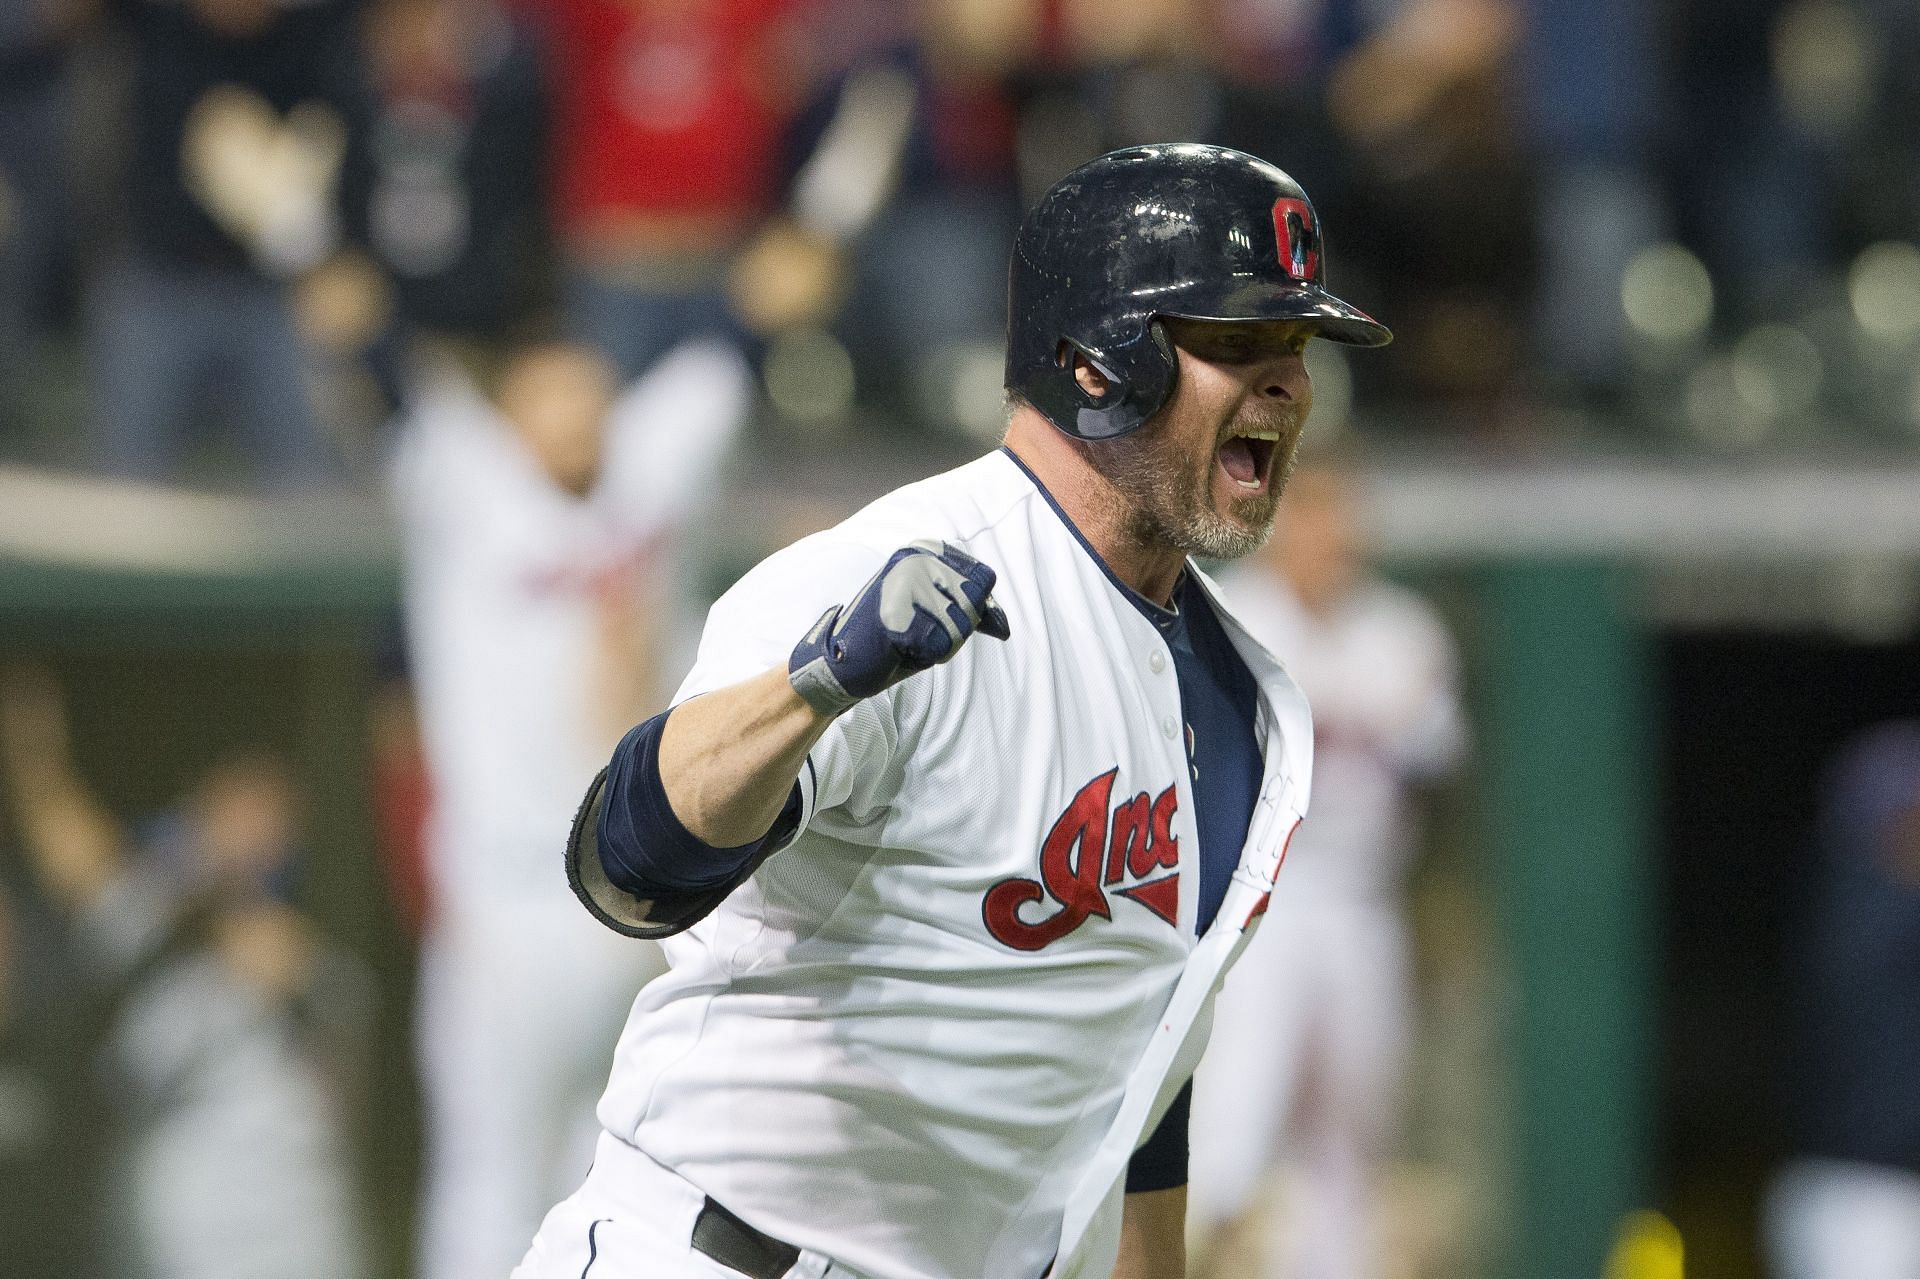 Jason Giambi likens Astros' cheating scandal to PED-use in MLB